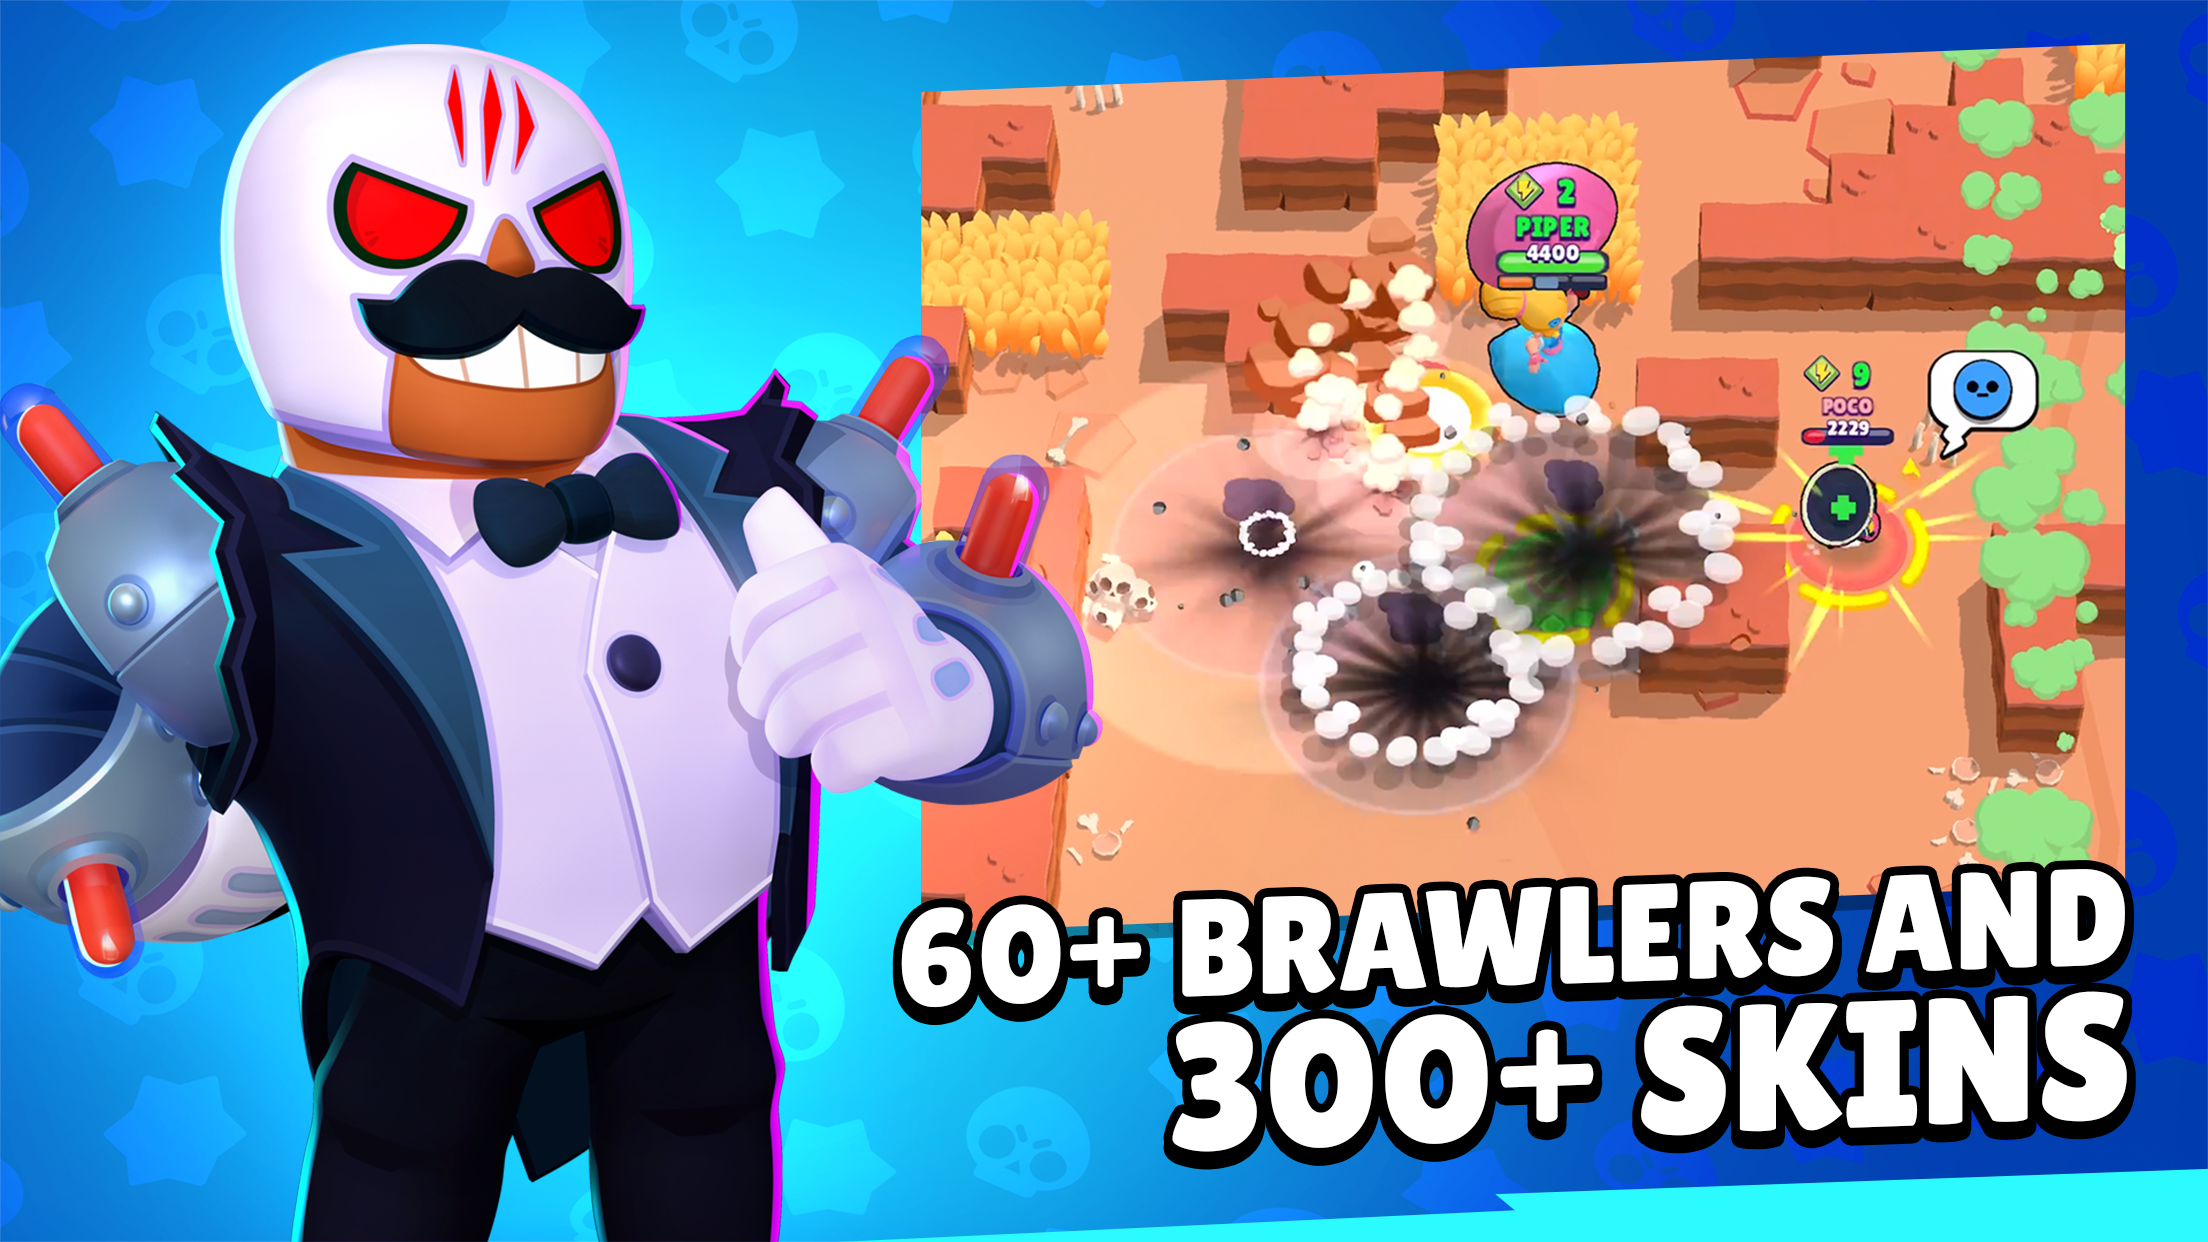 Every current and upcoming Brawl Stars event